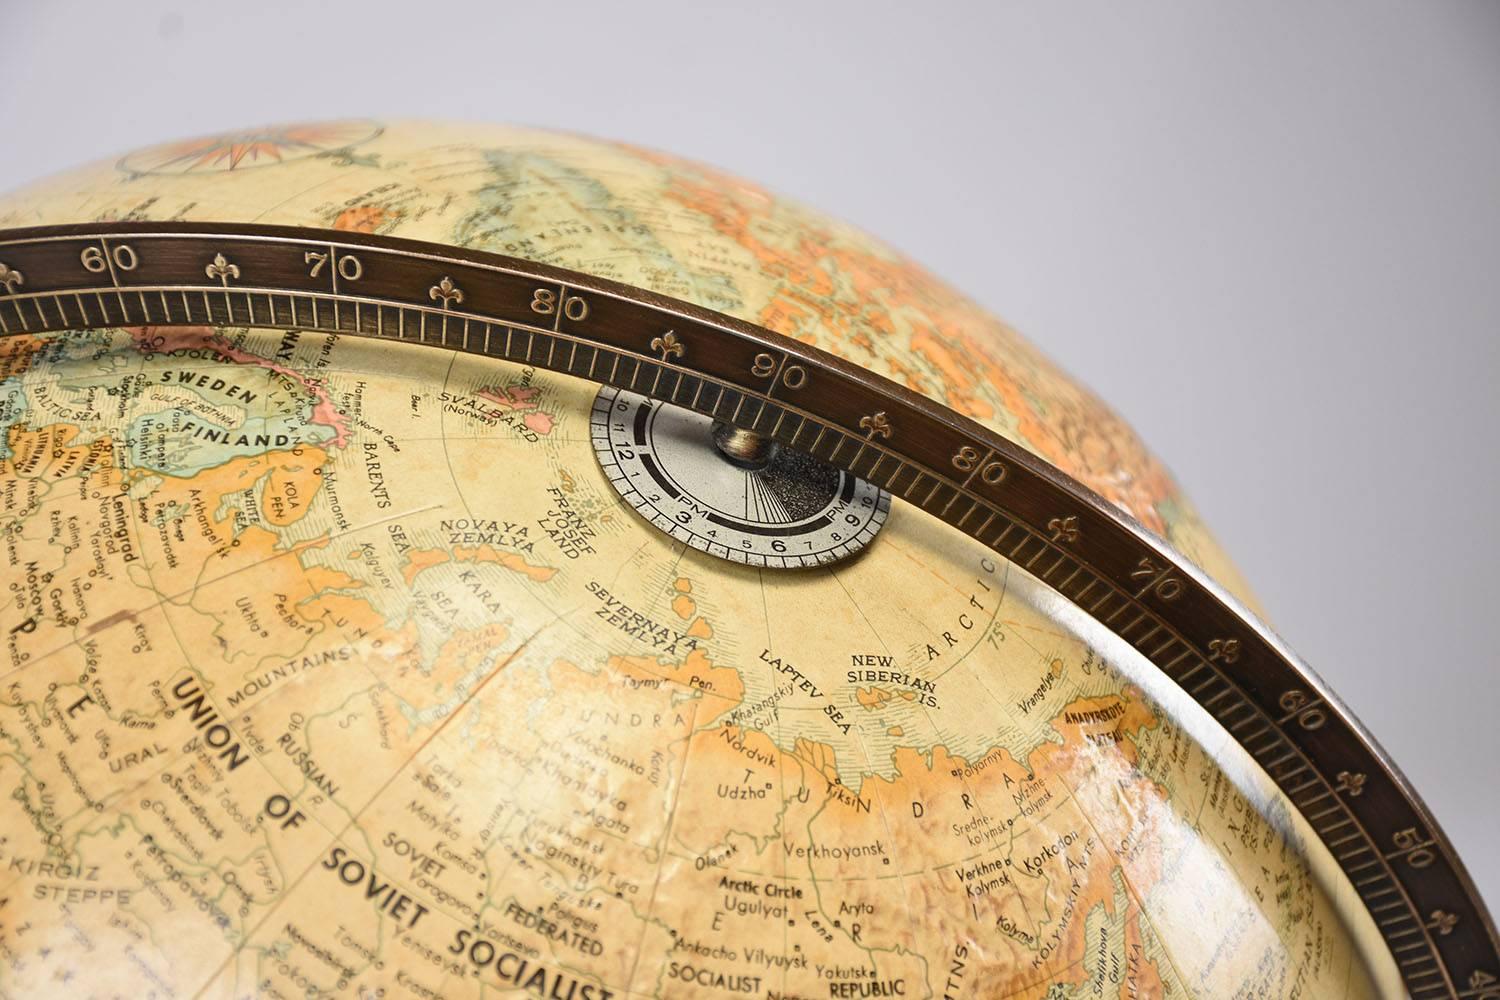 This Replogle "World Classic" series standing globe dates back to 1990 and is attributed to Paul McCobb. The rotating globe is in great condition with only minor wear to the map itself. The three pole base is circular and very sturdy. This